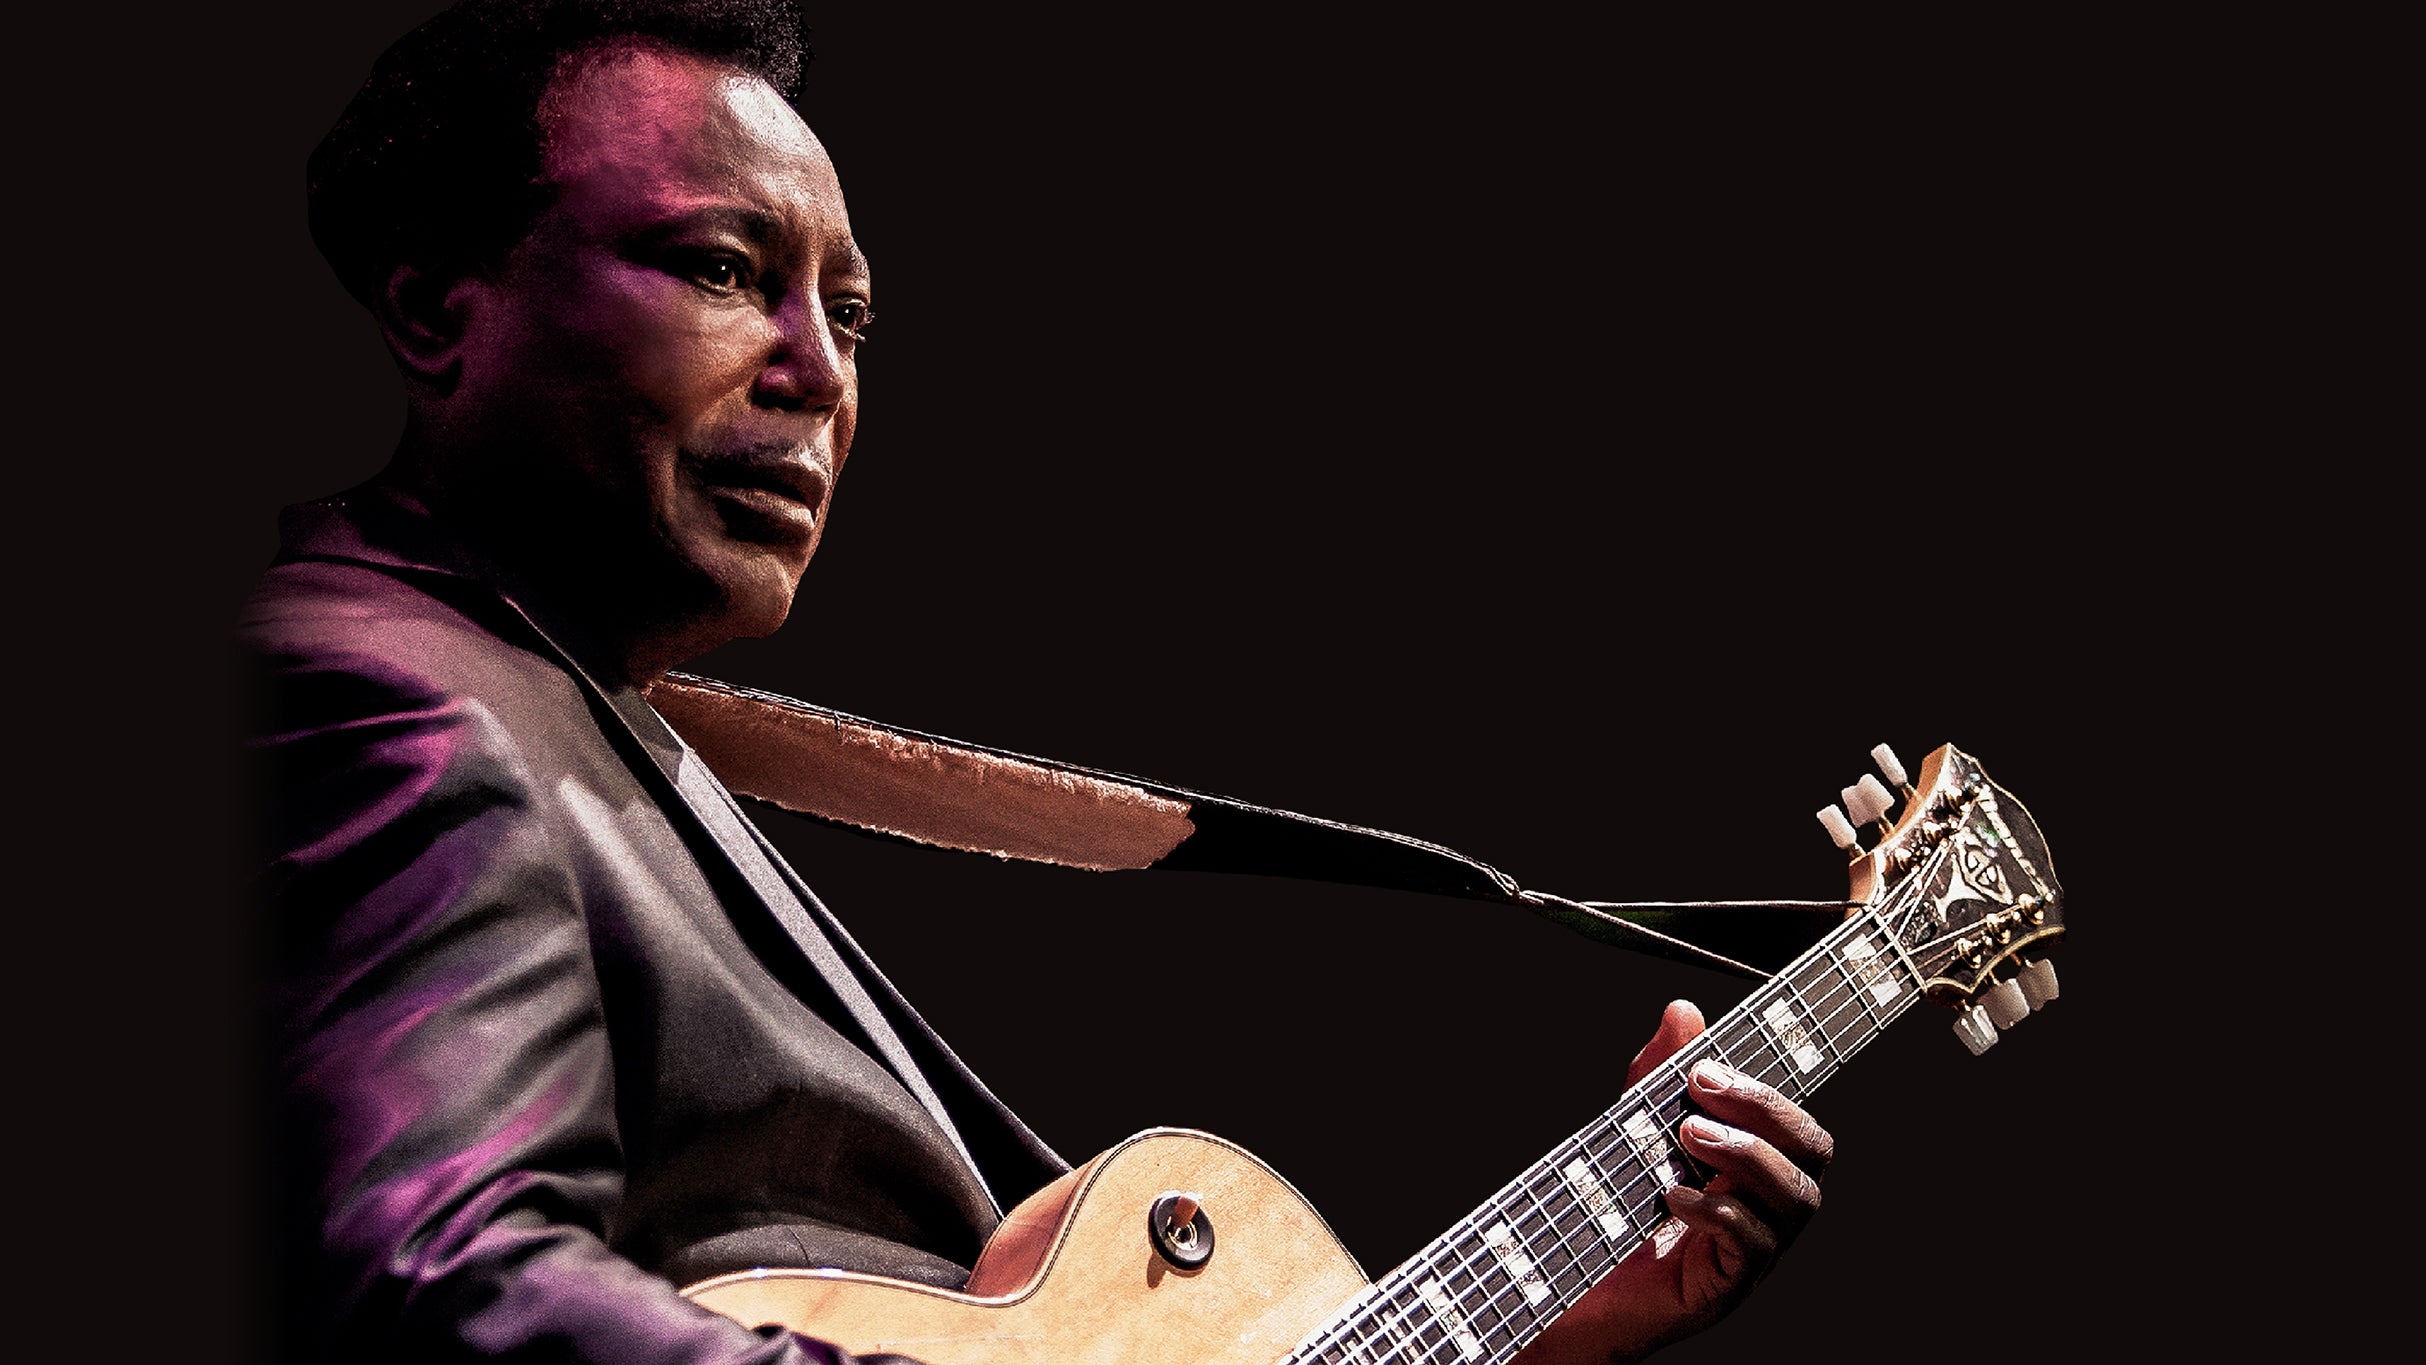 presale pa55w0rd for George Benson tickets in Chandler - AZ (Chandler Center for the Arts)